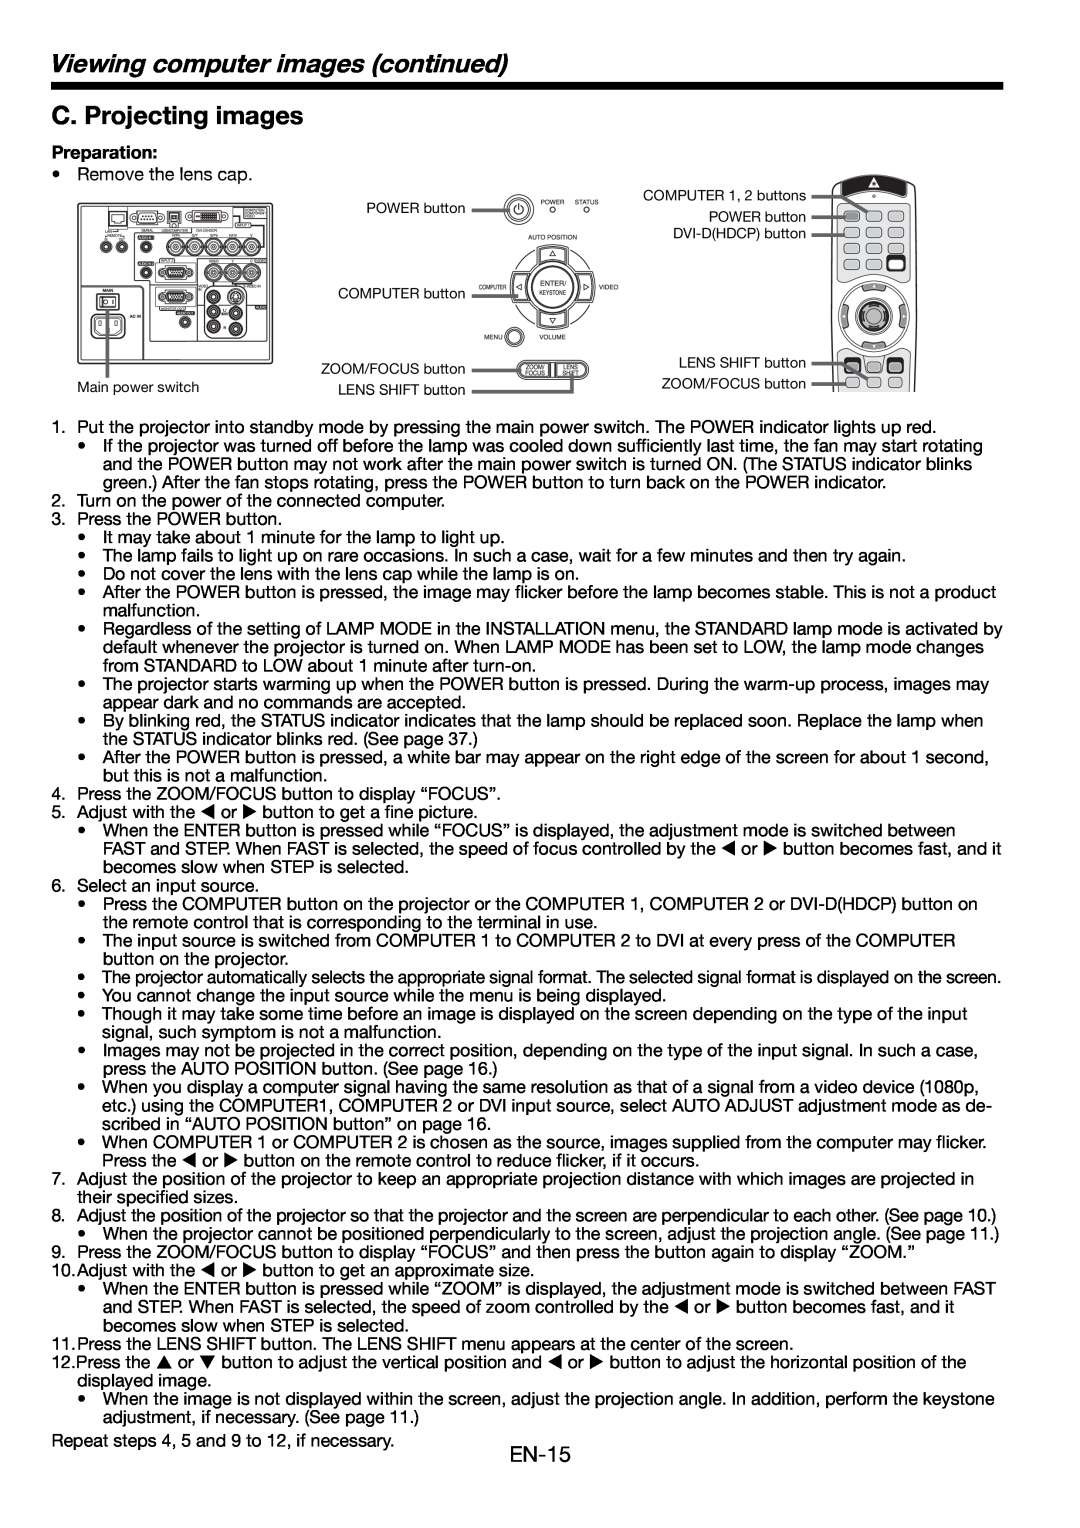 Mitsumi electronic HD8000 user manual C. Projecting images, Viewing computer images continued, EN-15, Preparation 